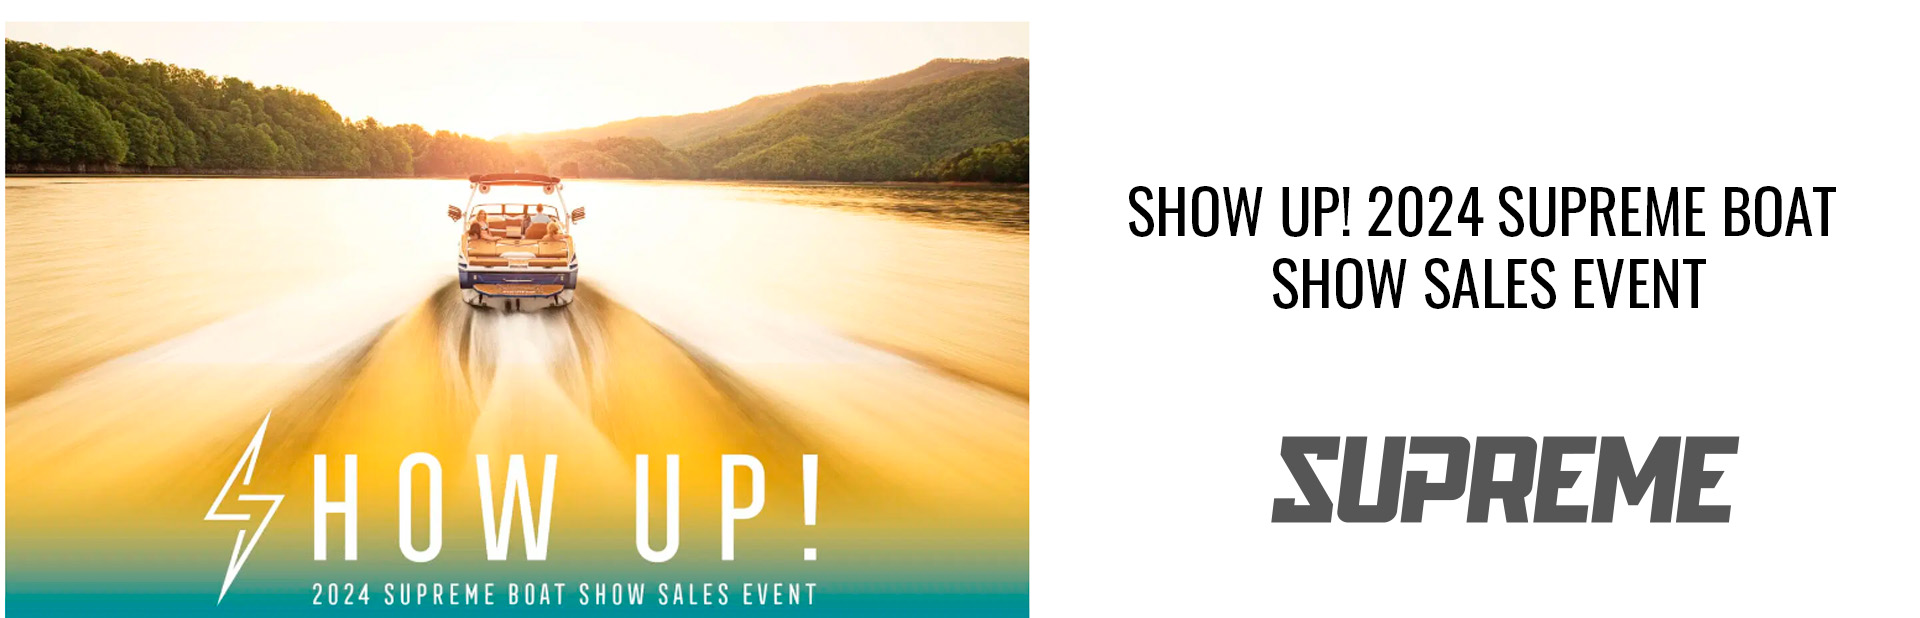 SHOW UP! 2024 SUPREME BOAT SHOW SALES EVENT